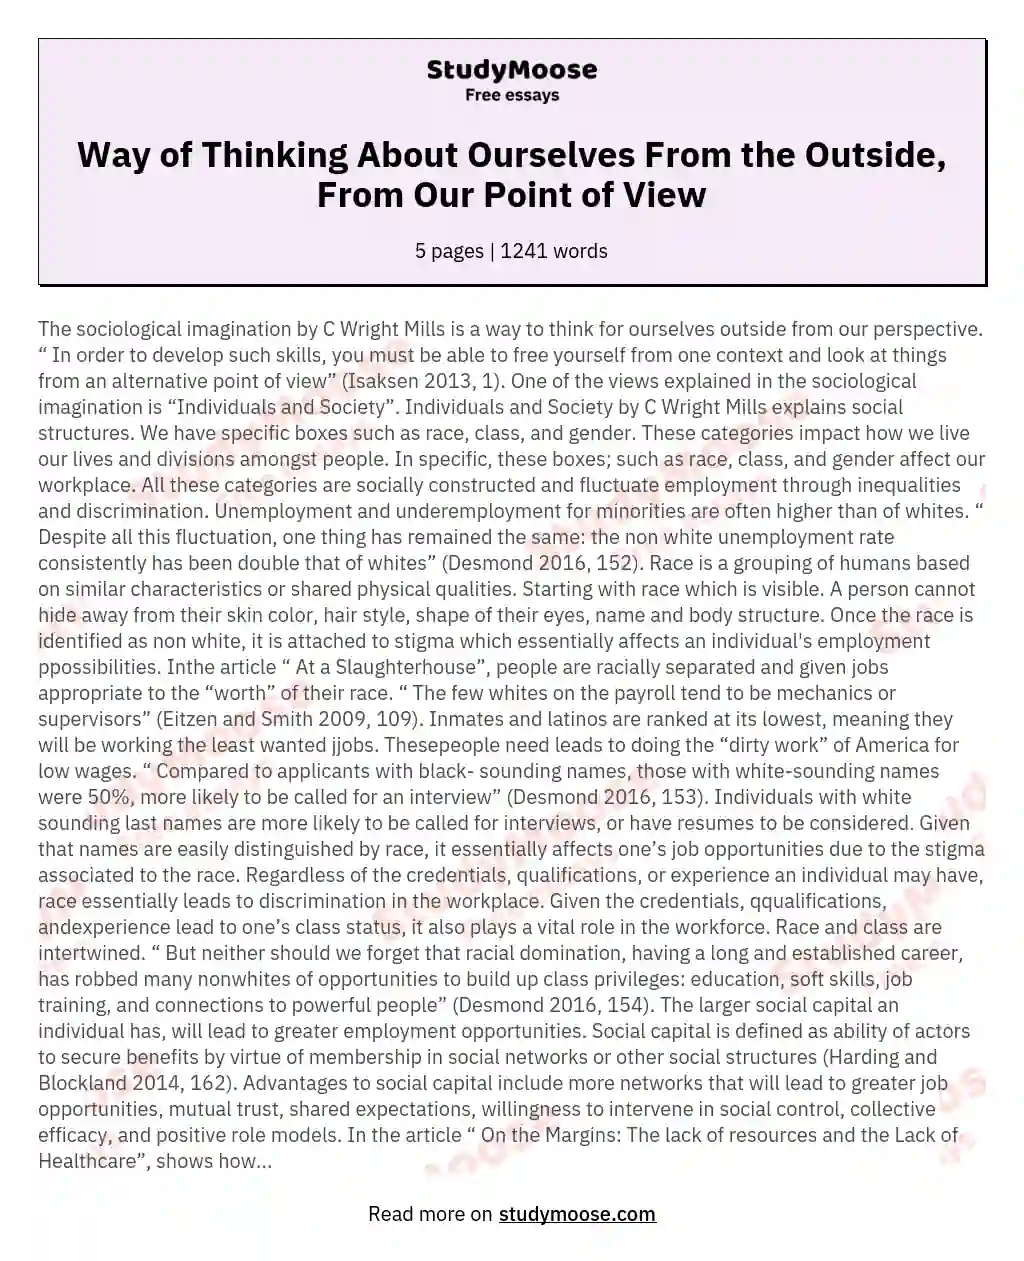 Way of Thinking About Ourselves From the Outside, From Our Point of View essay